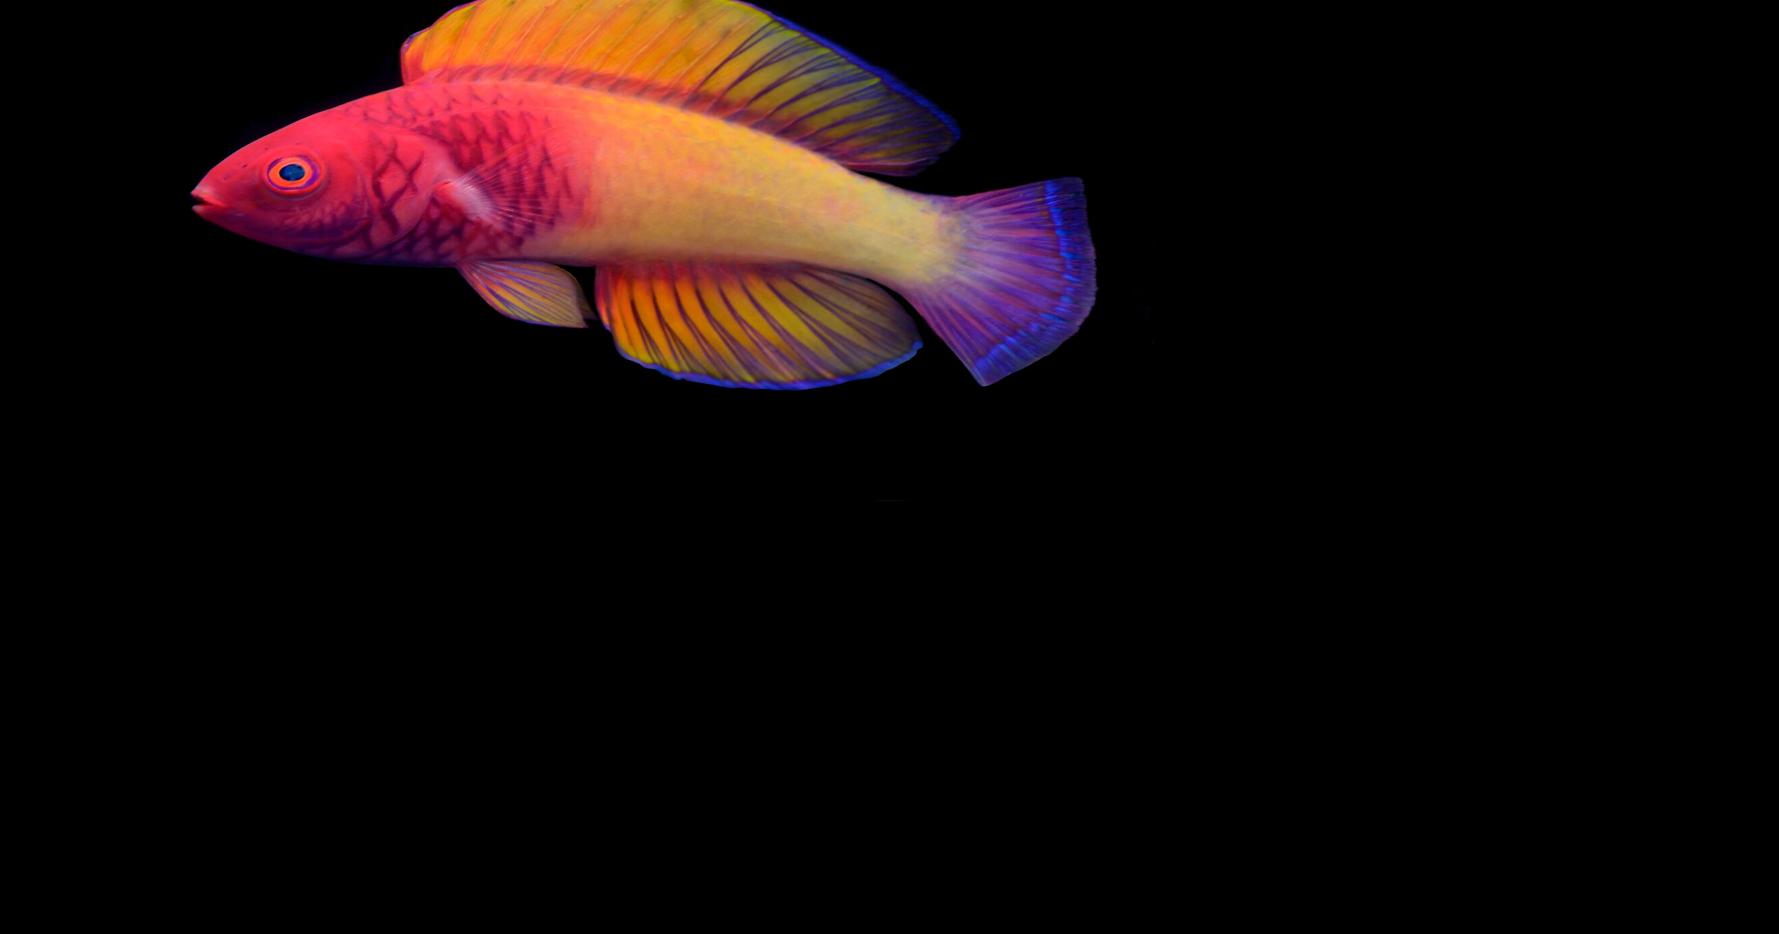 Newly discovered rainbow-colored fish lives in the ocean's